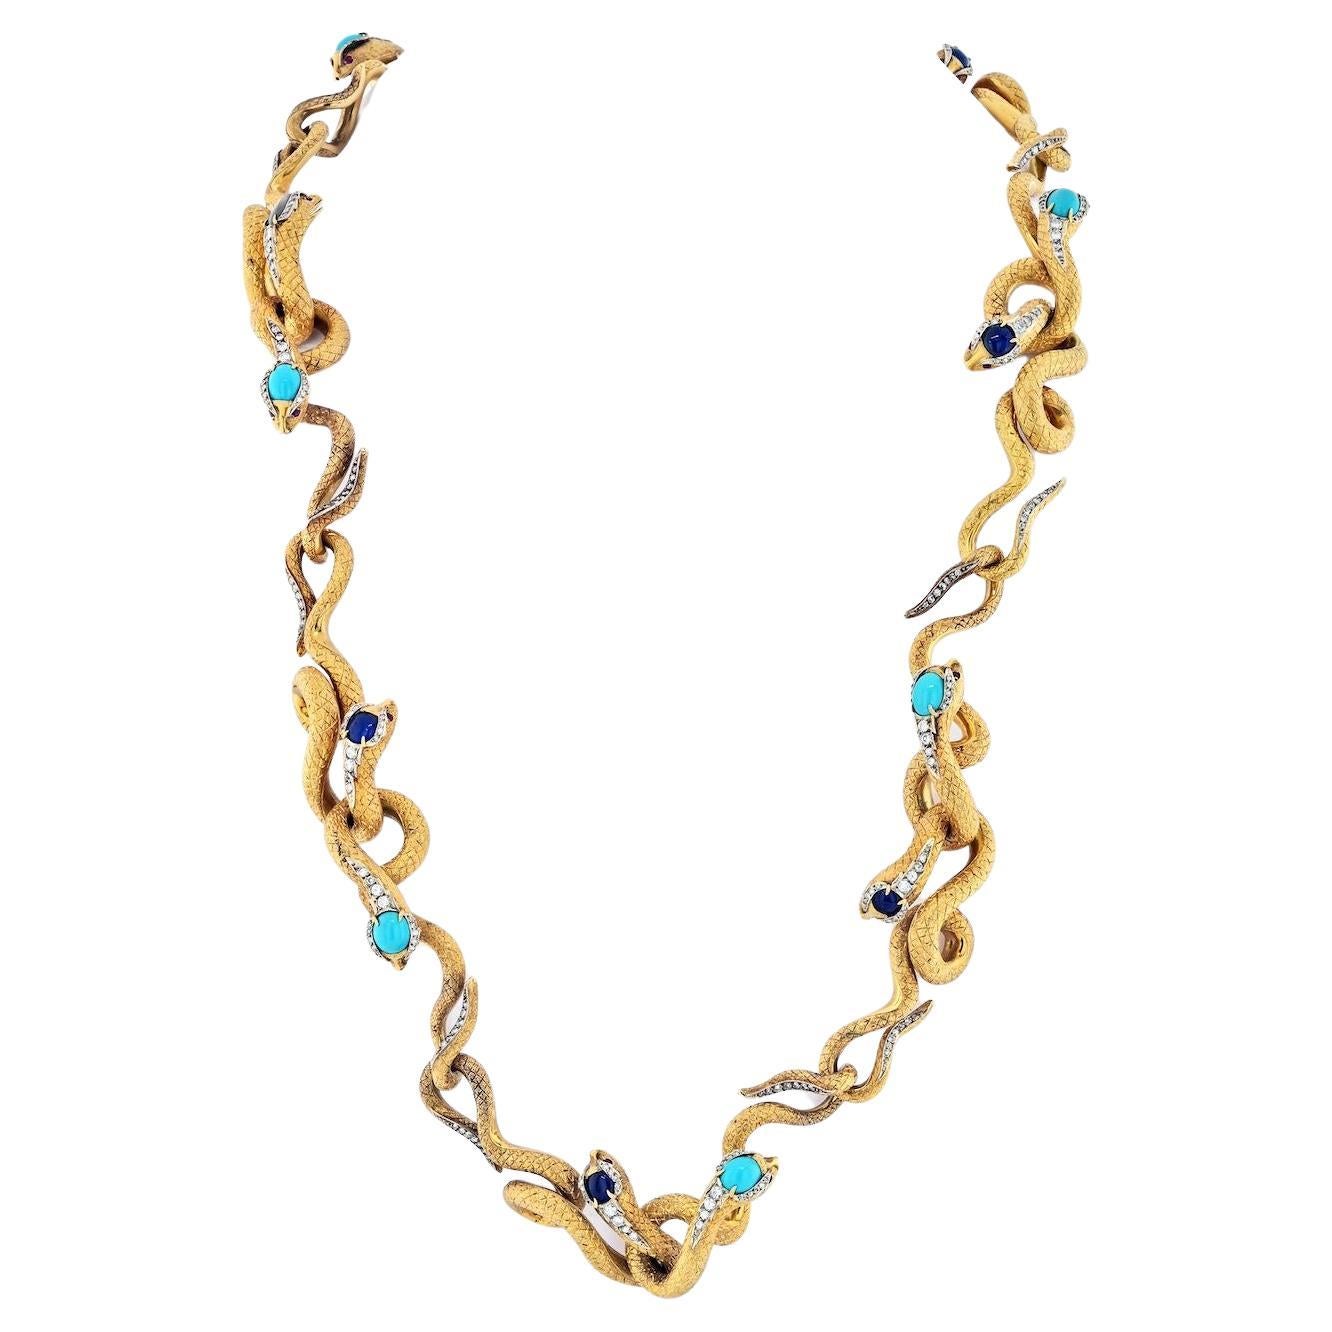 18K Yellow Gold Articulated Snakes with Turquoise, Lapis and Diamond Necklace